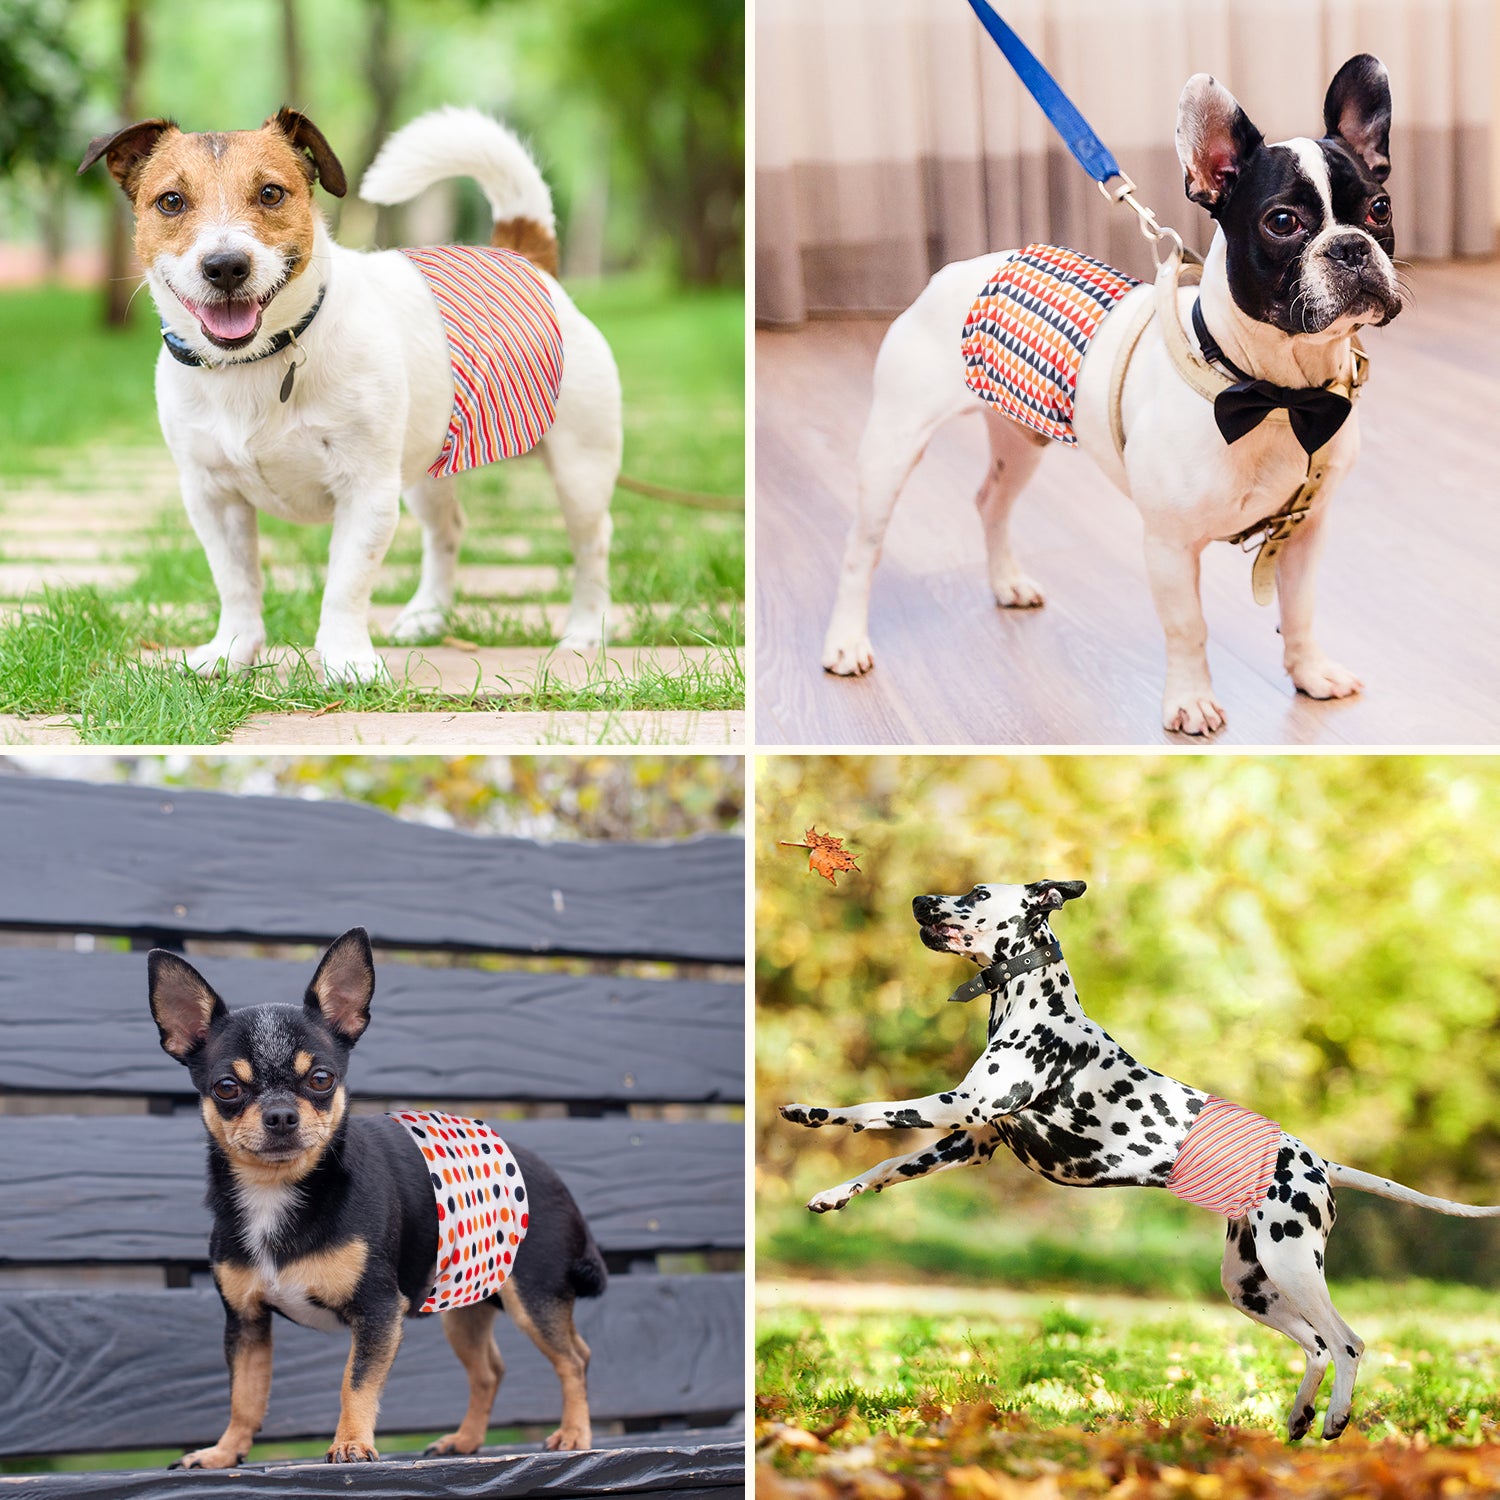 Washable Male Dog Diapers, Reusable Doggy Diapers, 3 Pack (Geometric Patterns)